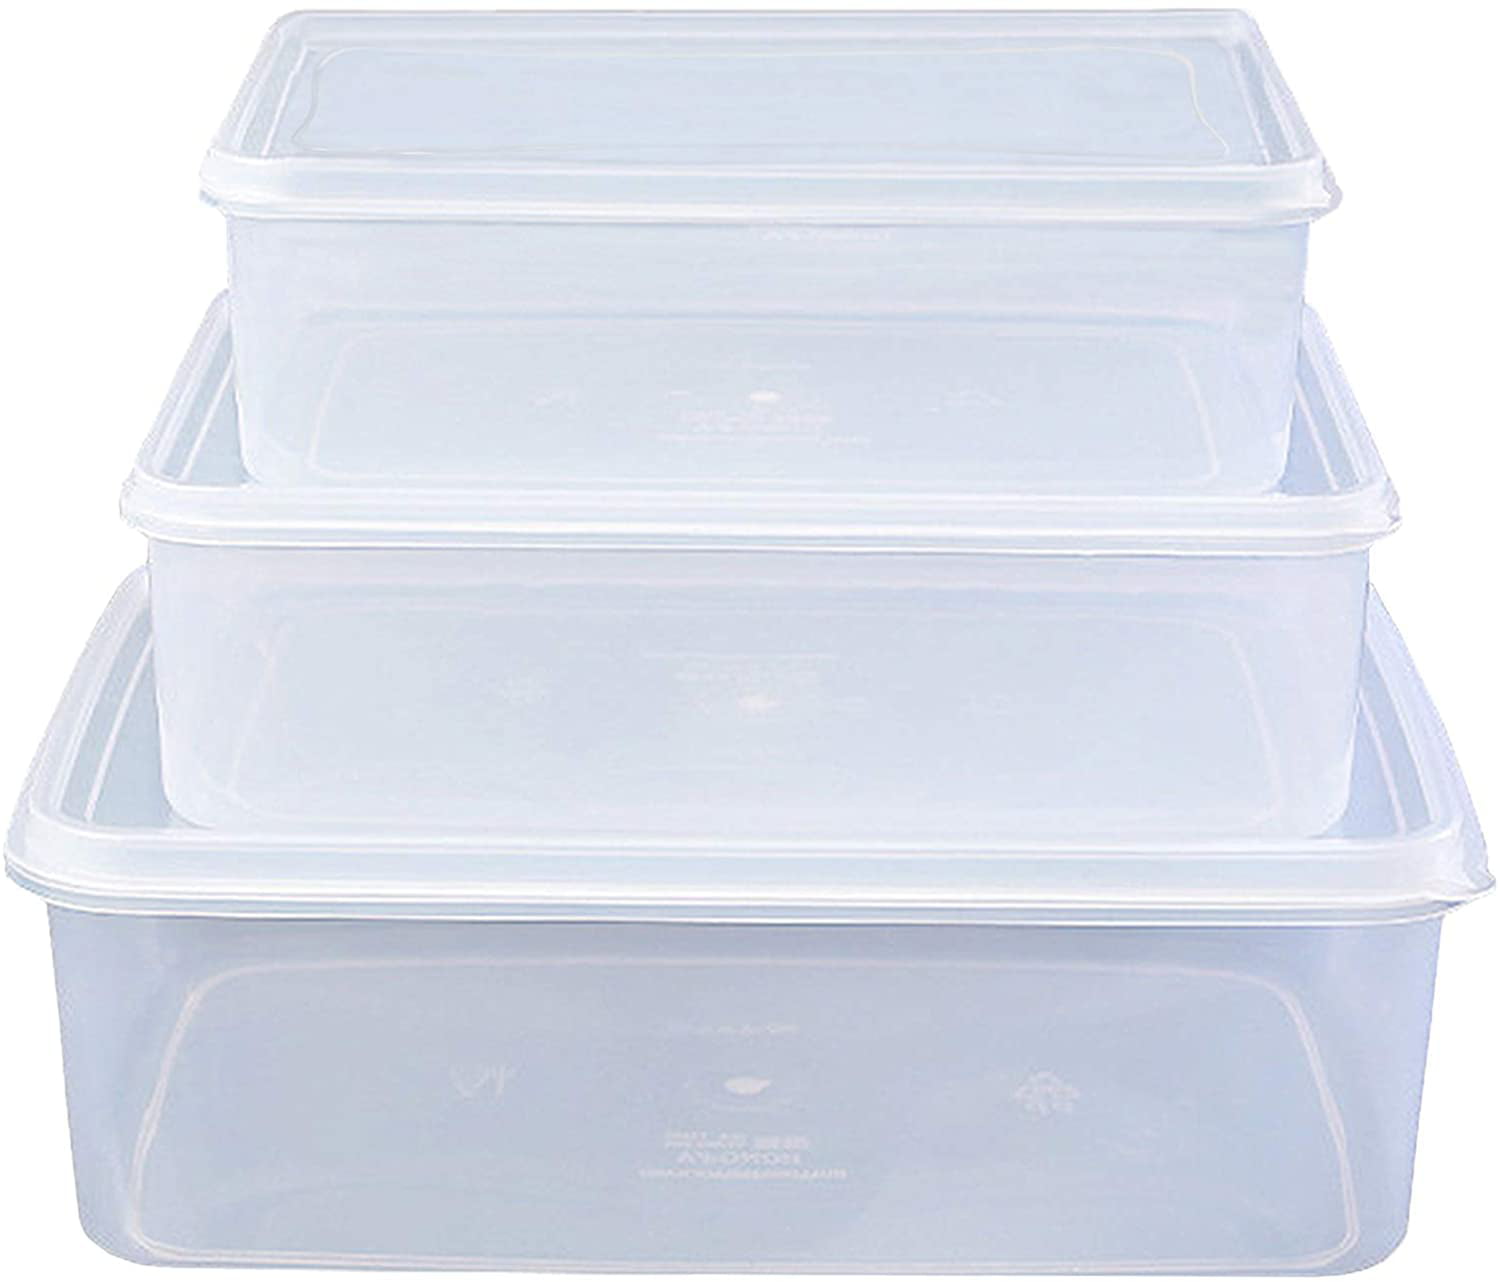 3.5L STACKABLE DRY FOOD CONTAINER & SCOOP Rice/Pasta/Cereal Kitchen Storage Box 